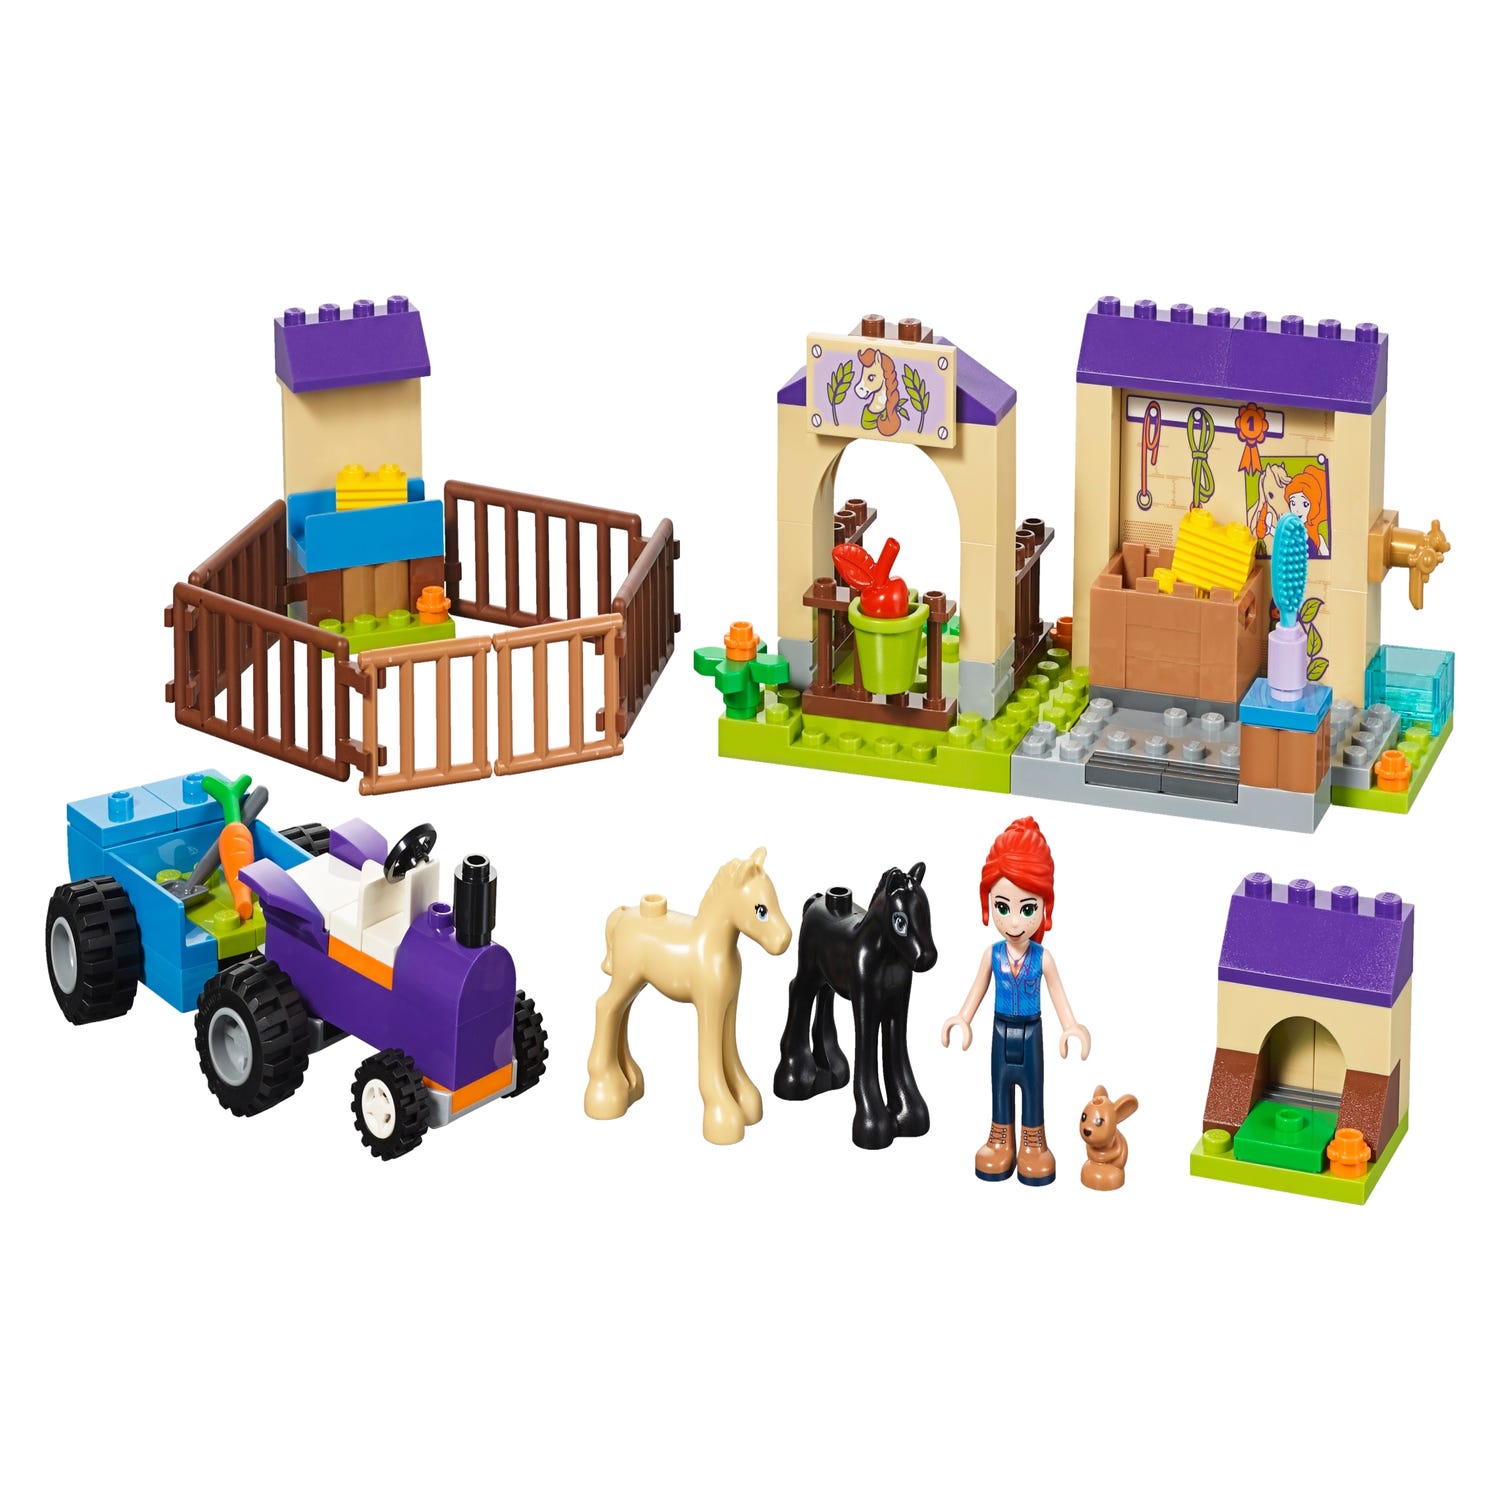 Mia's Foal Stable 41361 | Friends Buy online at the LEGO® Shop US